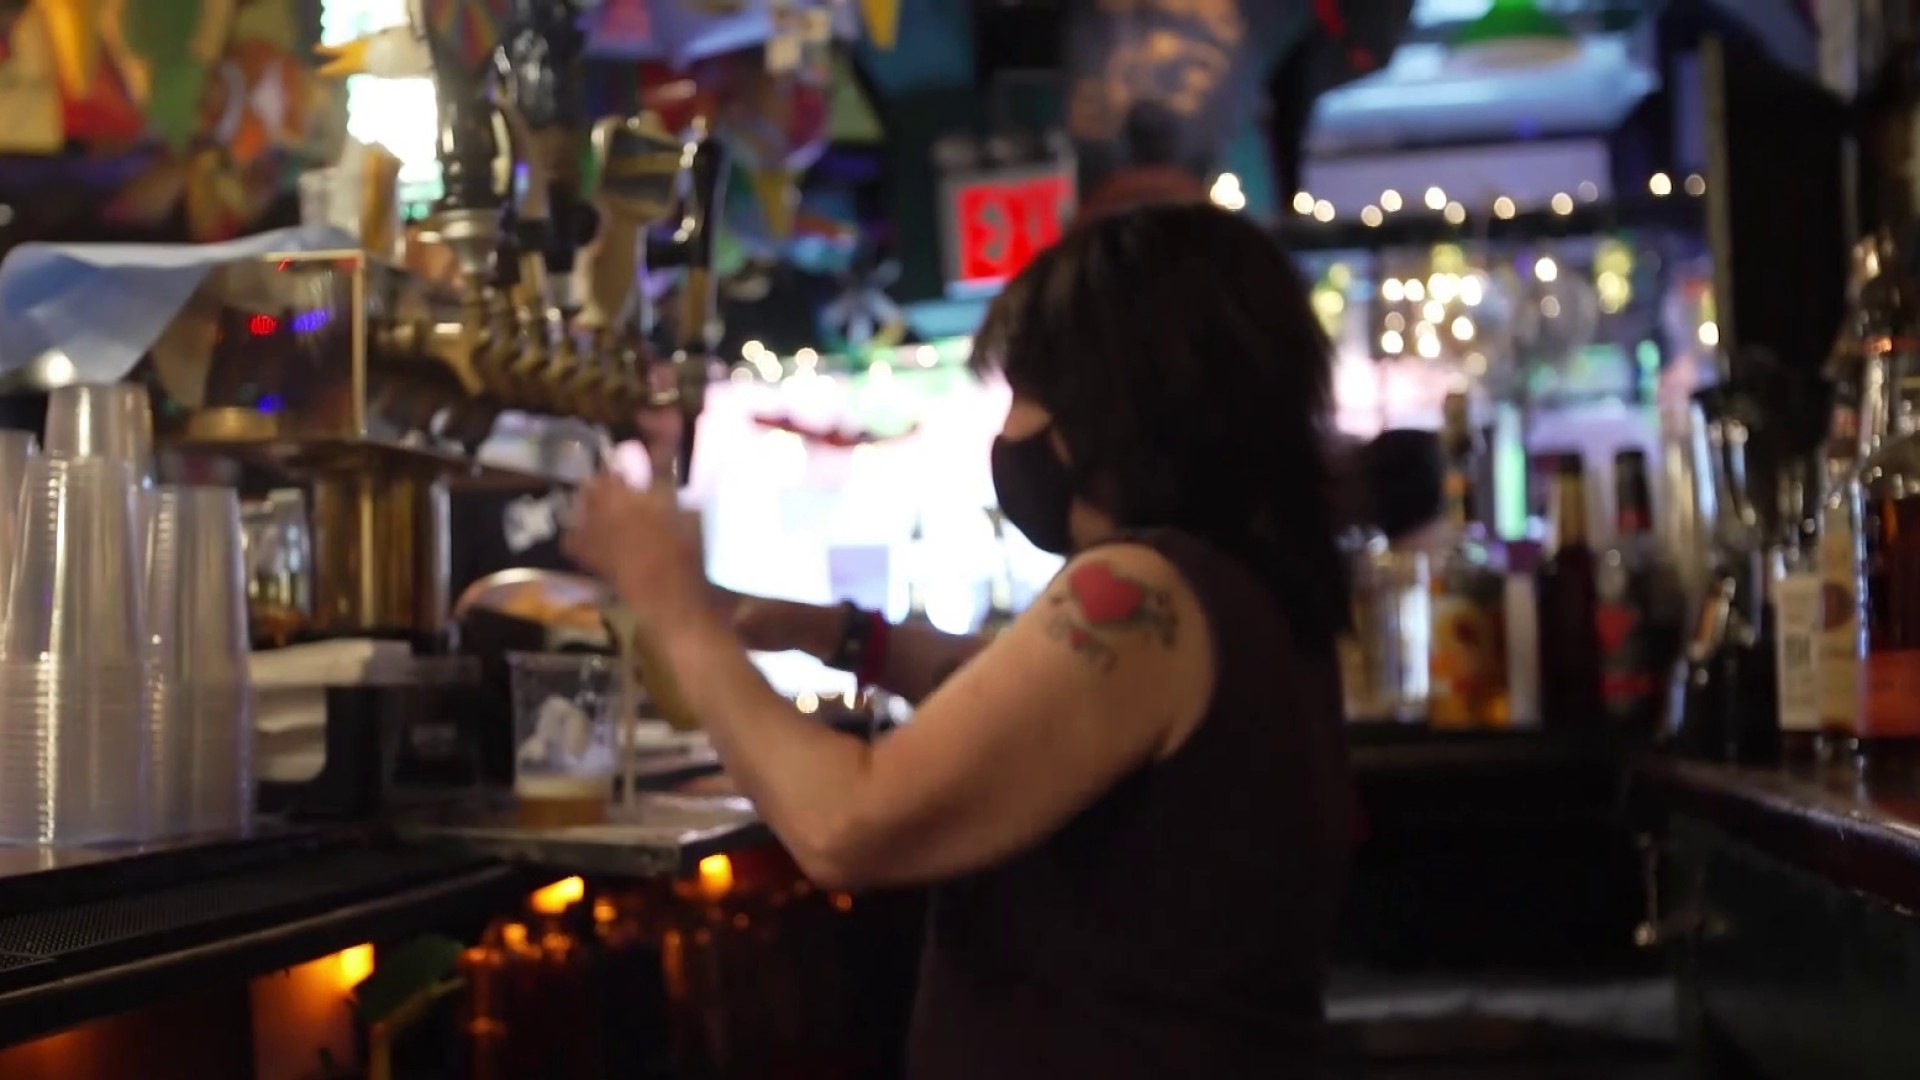 Fewer than 20 Lesbian bars nationwide struggle to stay open